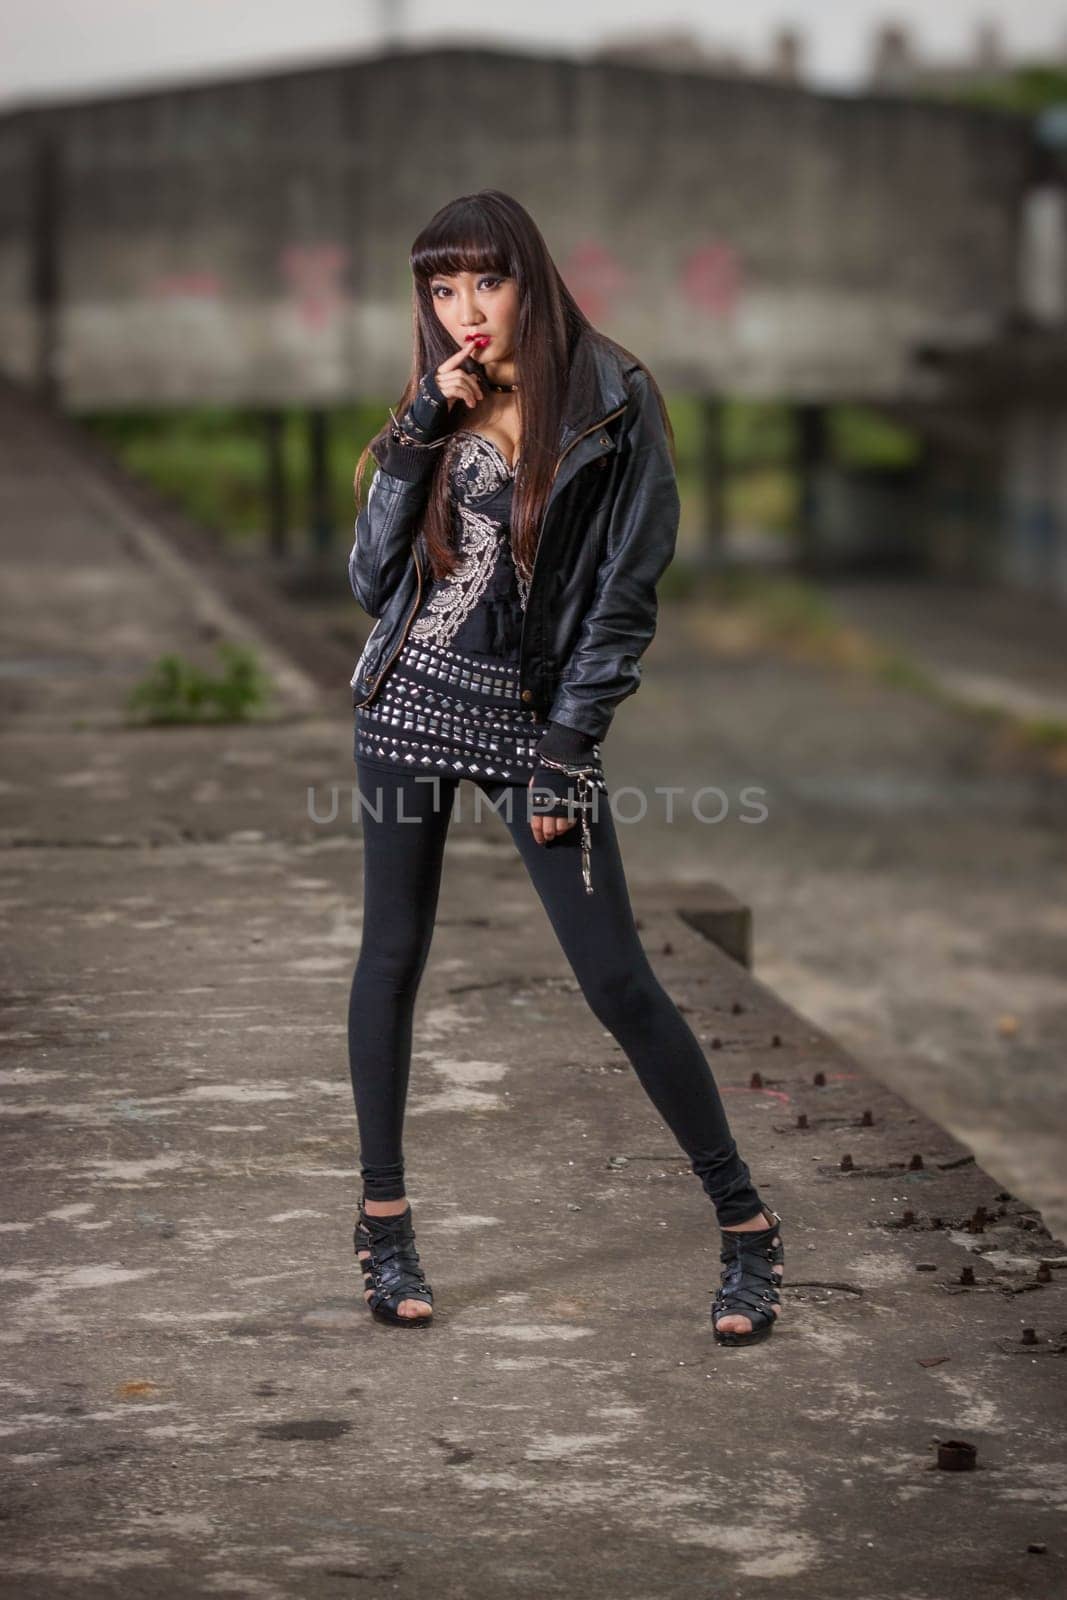 Asian American woman in emo goth clothing at an abandoned building